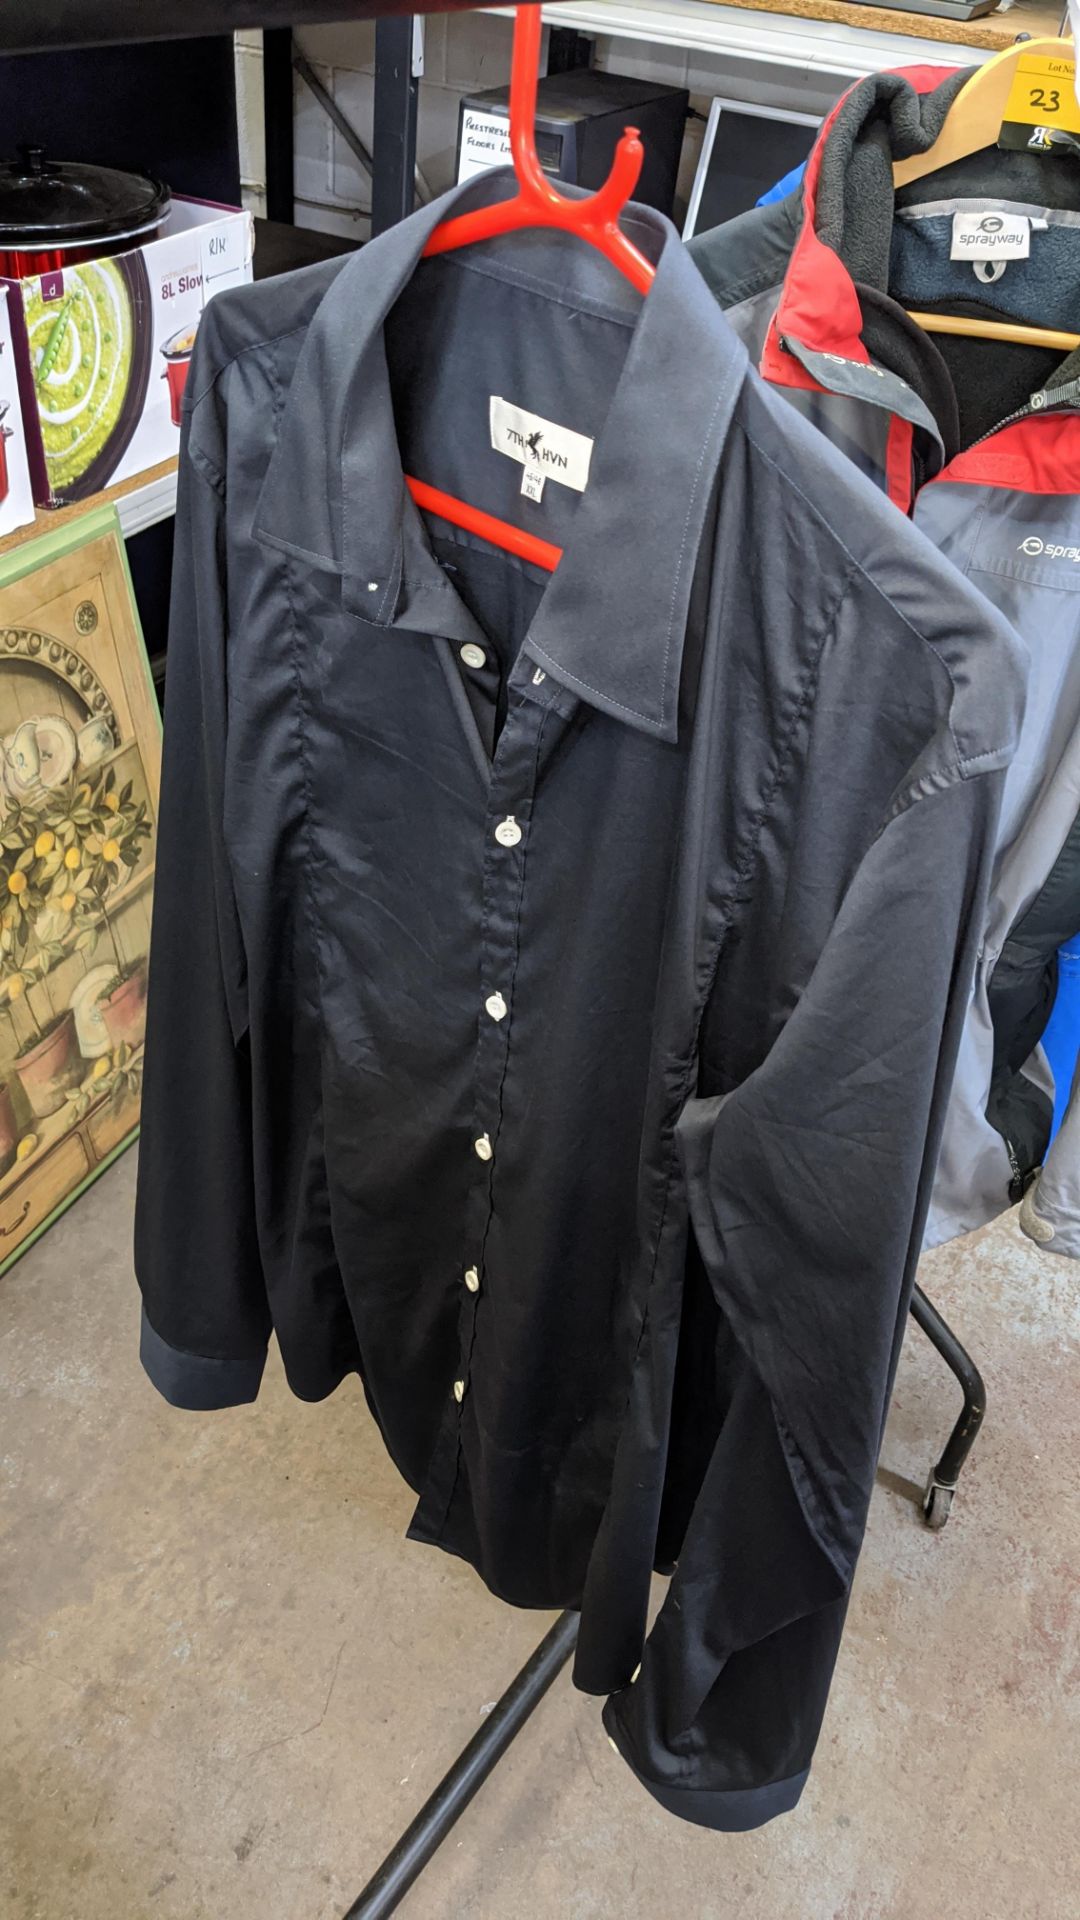 3 off men's short & long sleeve shirts by Dorsia & 7TH HVN, sizes XL & XXL. IMPORTANT: This - Image 6 of 6